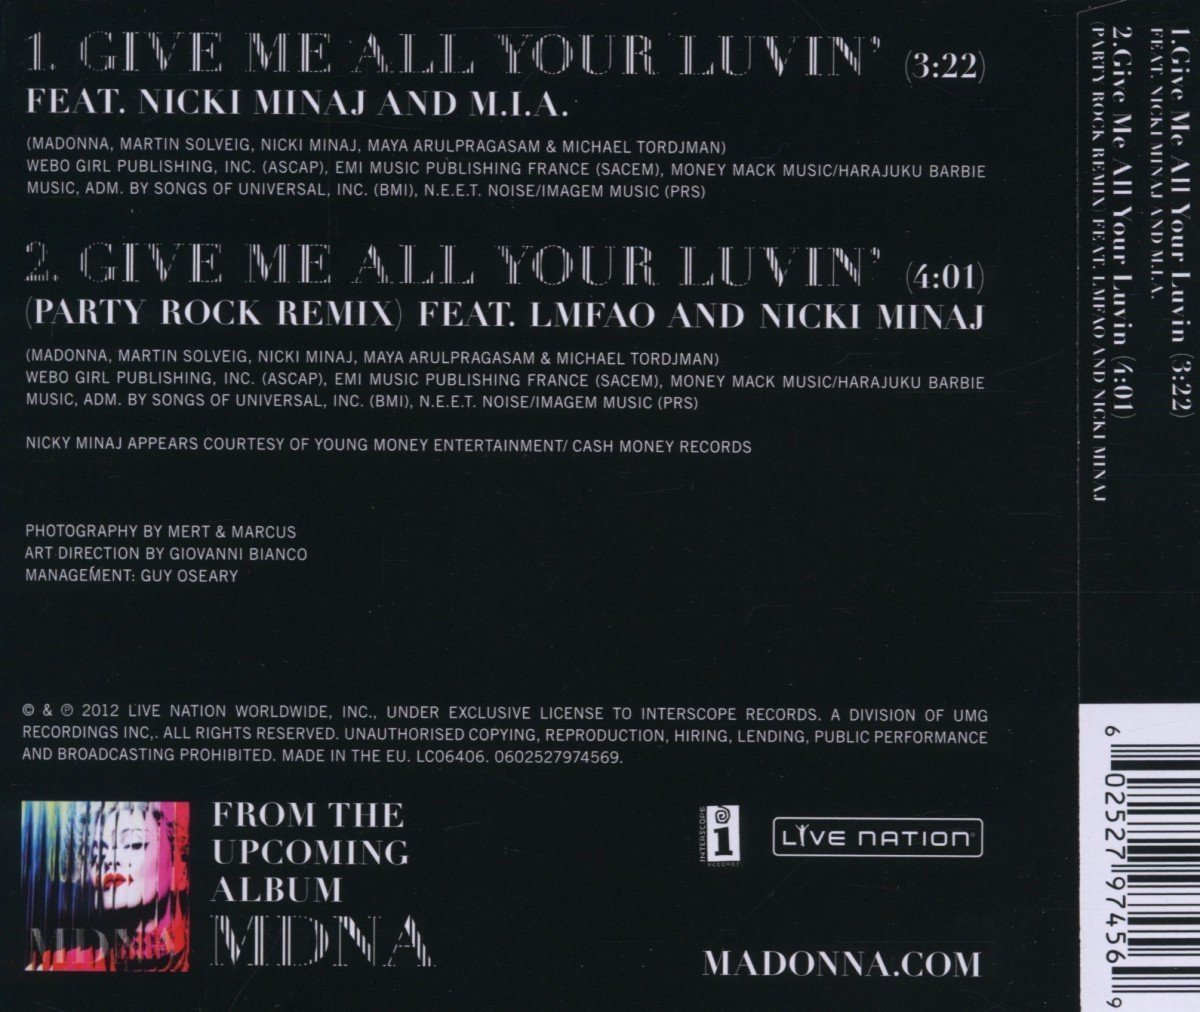 Single 'Give Me All Your Luvin' (Feat. Nicki Minaj & M.I.A.)  - Página 22 20120226-pictures-madonna-give-me-all-your-luvin-back